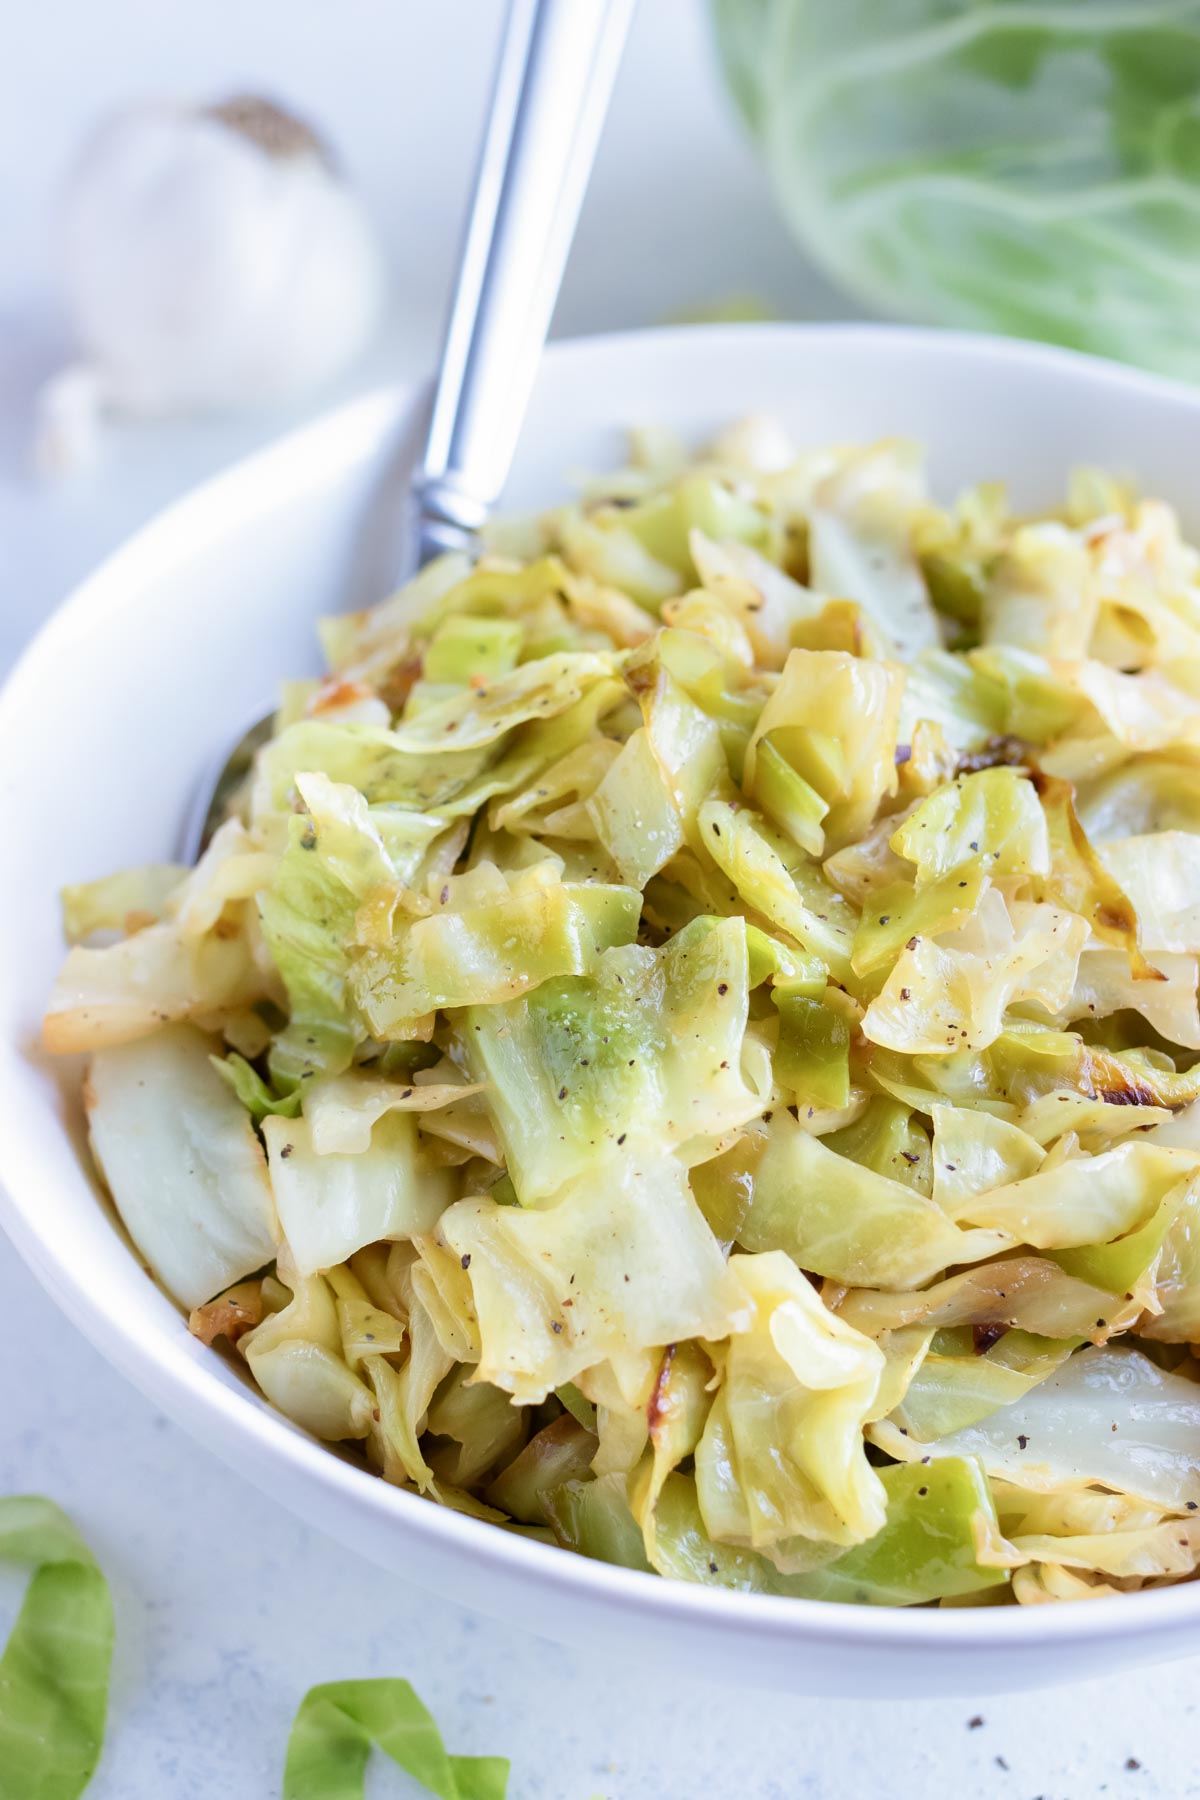 Sautéed cabbage is served with a spoon in a bowl.